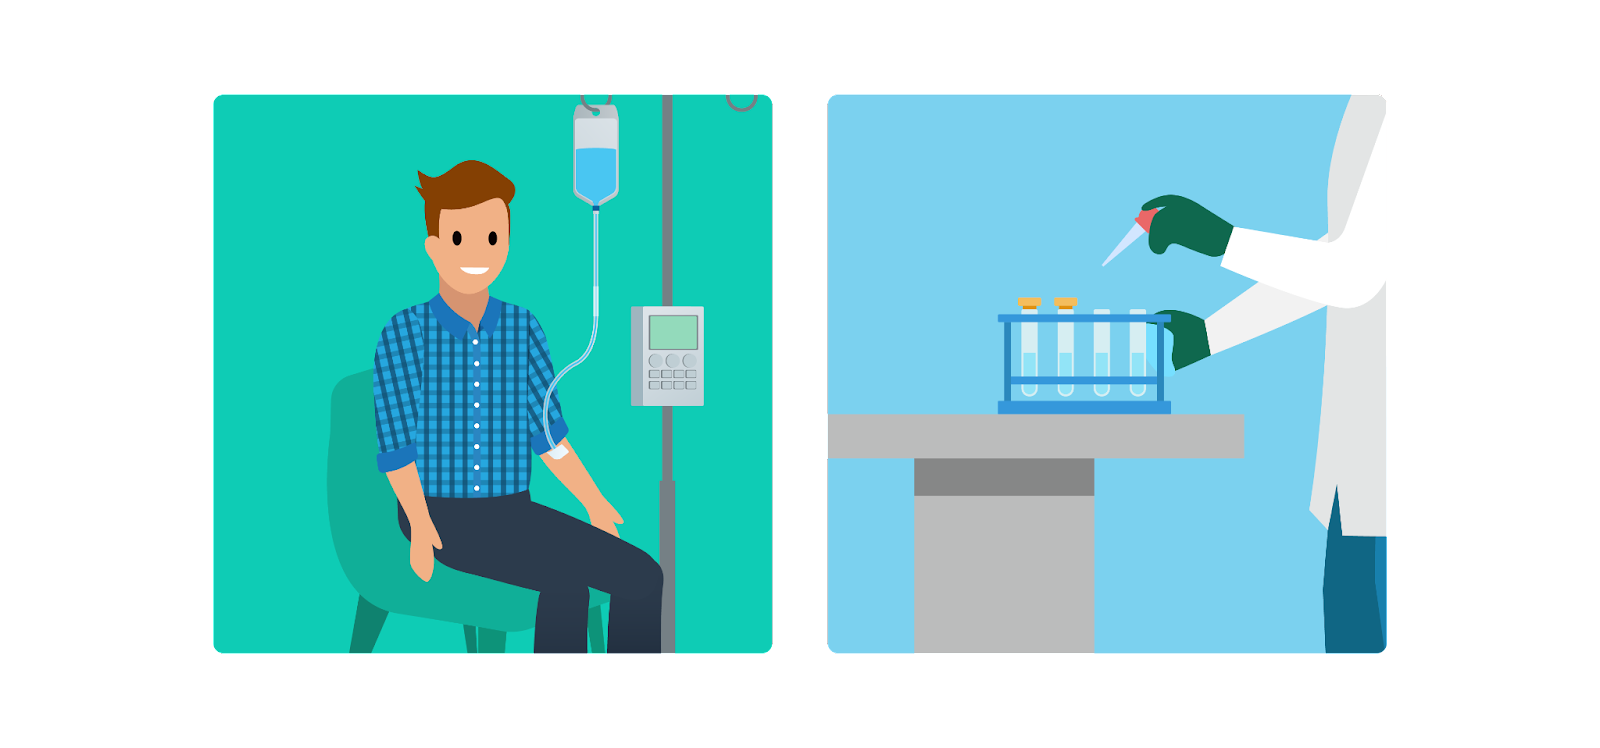 Left image is a patient receiving an infusion through a catheter, right image is a lab technician working with test tubes.